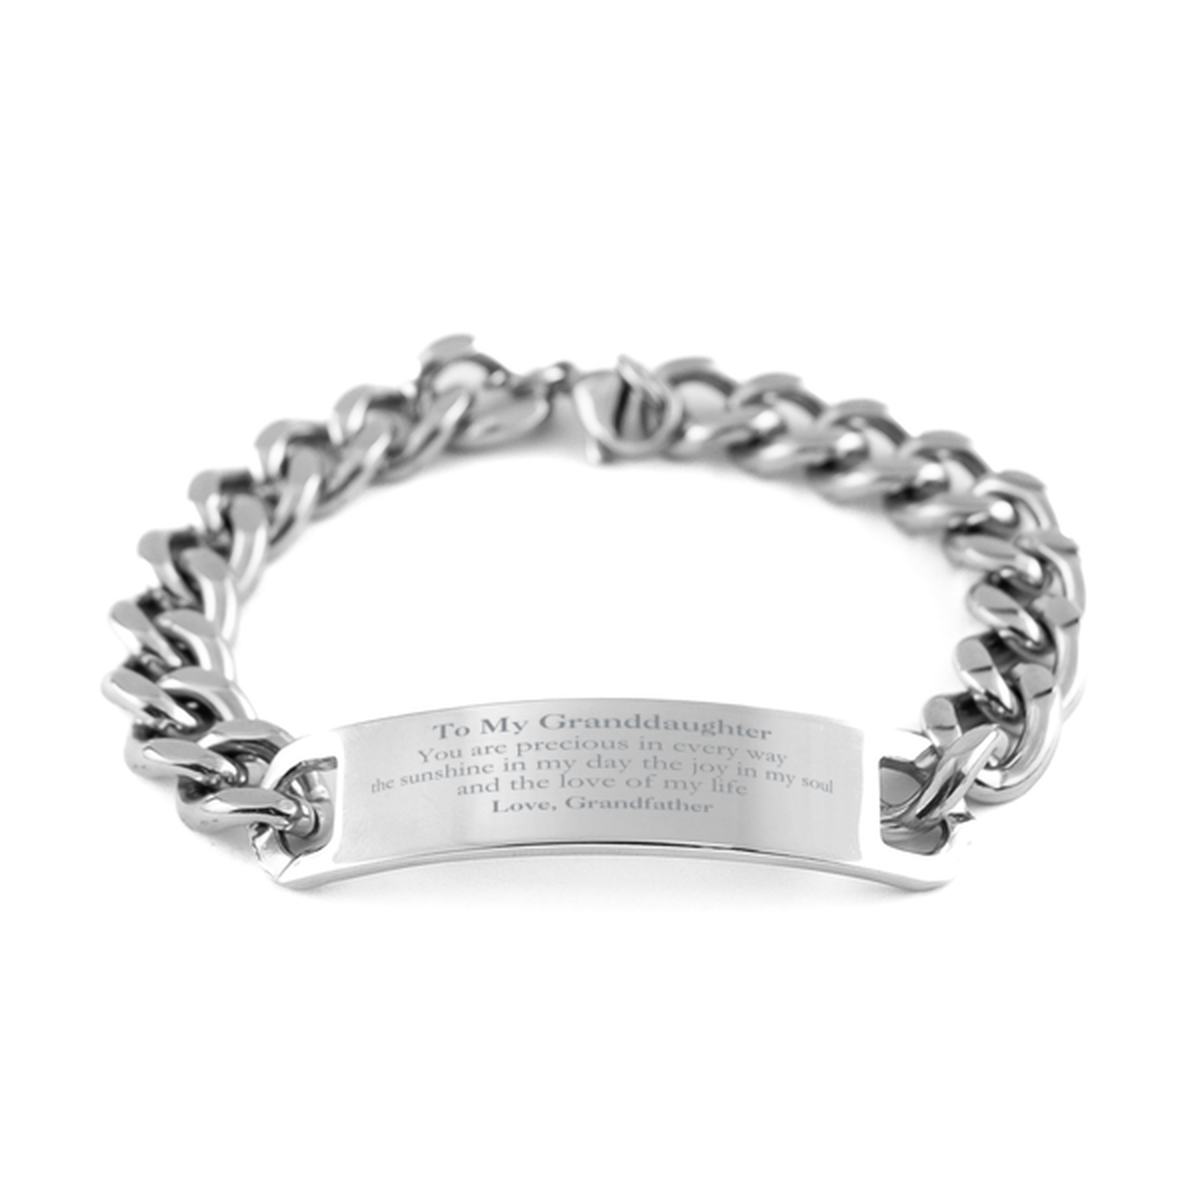 Graduation Gifts for Granddaughter Cuban Chain Stainless Steel Bracelet Present from Grandfather, Christmas Granddaughter Birthday Gifts Granddaughter You are precious in every way the sunshine in my day. Love, Grandfather